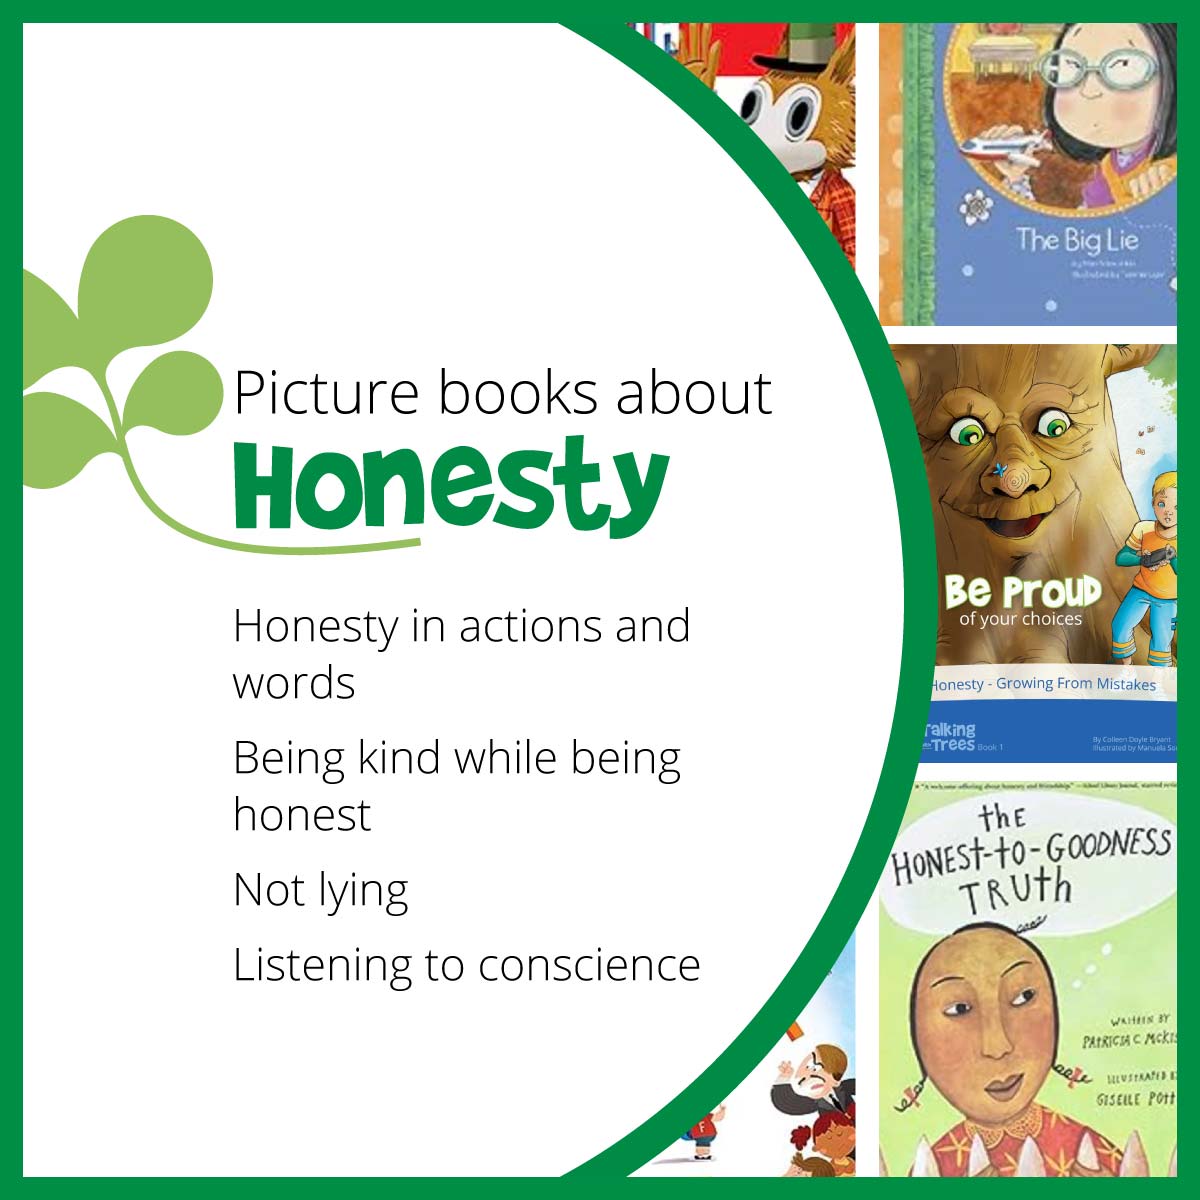 Children's books about what honesty is